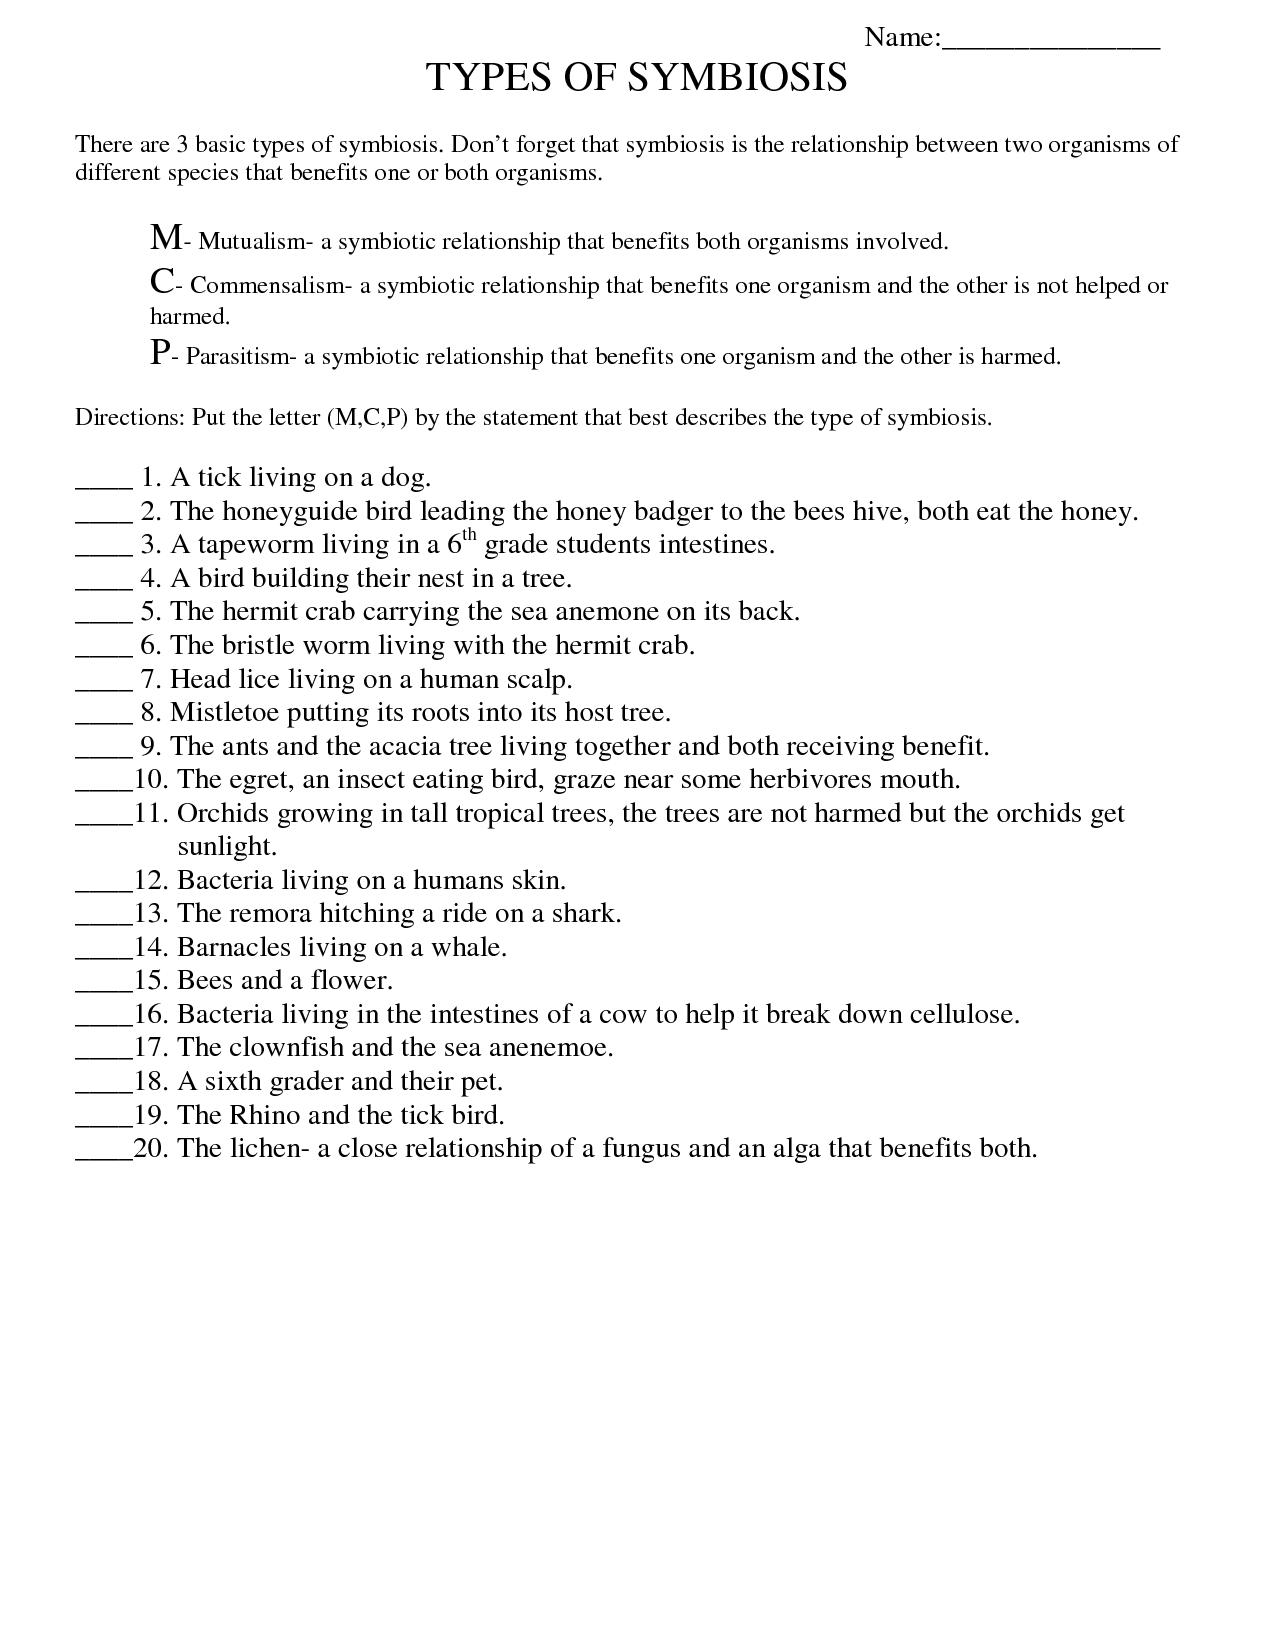 types-of-symbiosis-worksheet-answers-free-download-gambr-co